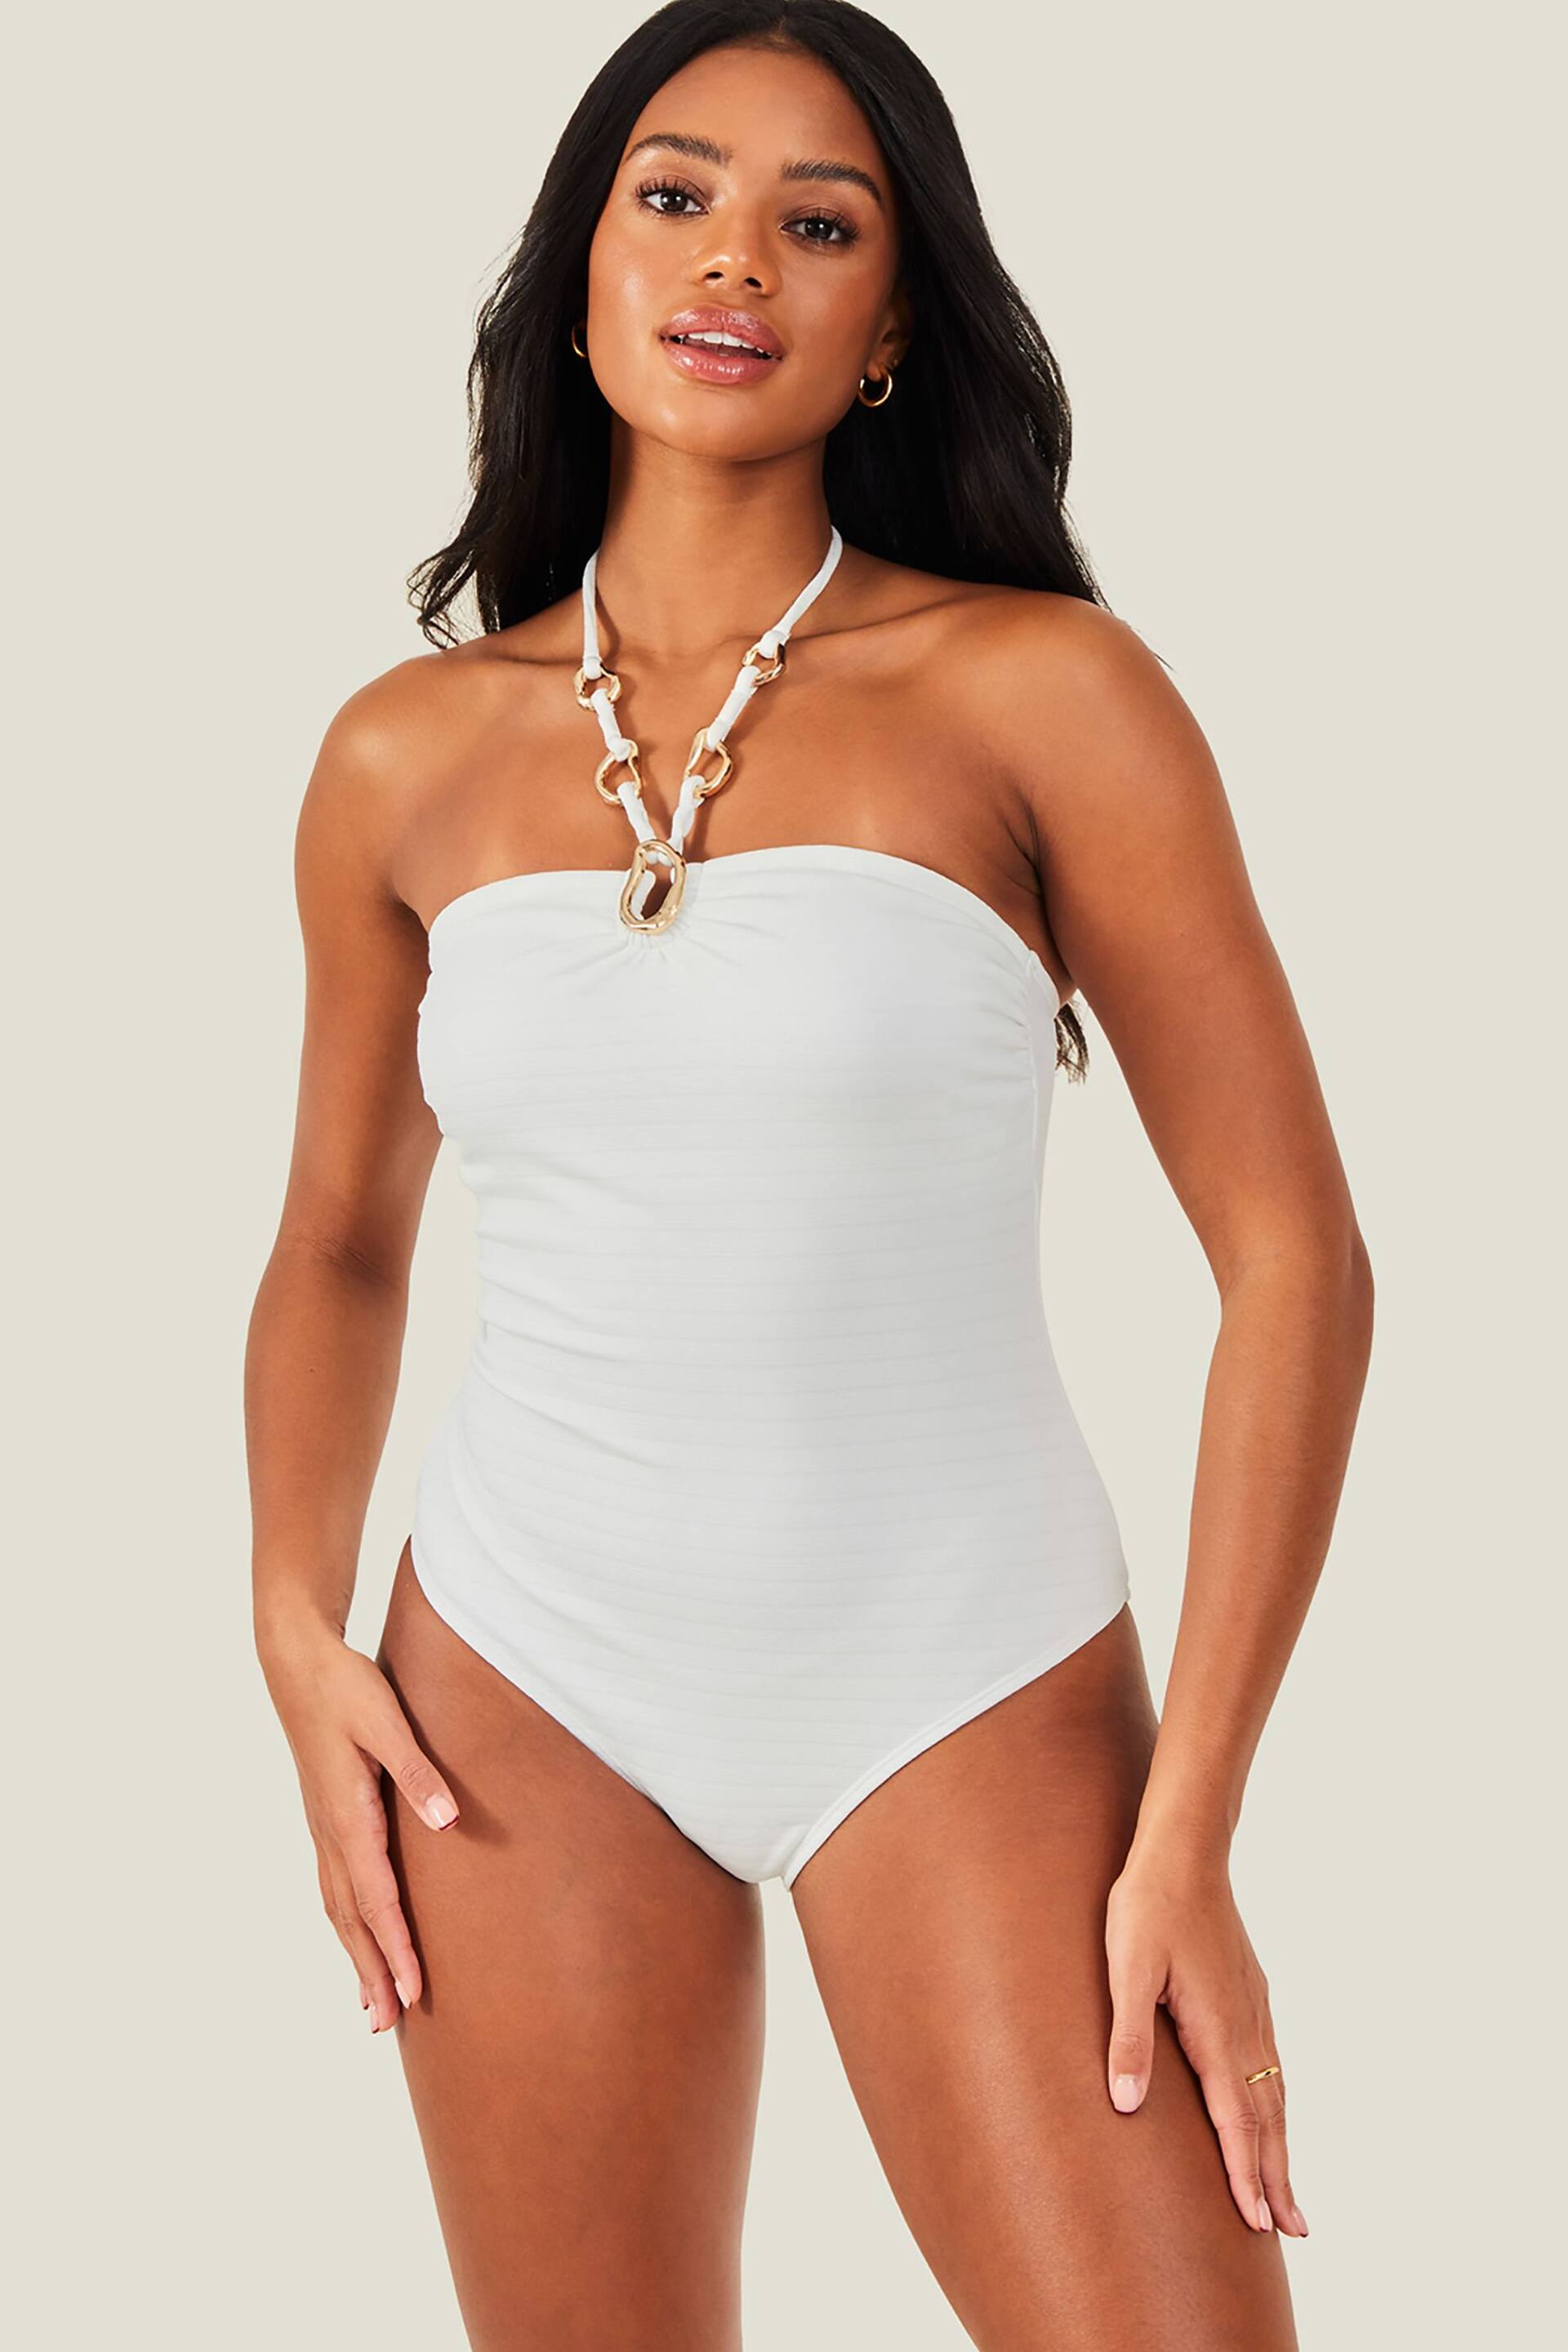 Accessorize White Ring Halter Neck Swimsuit - Image 1 of 3